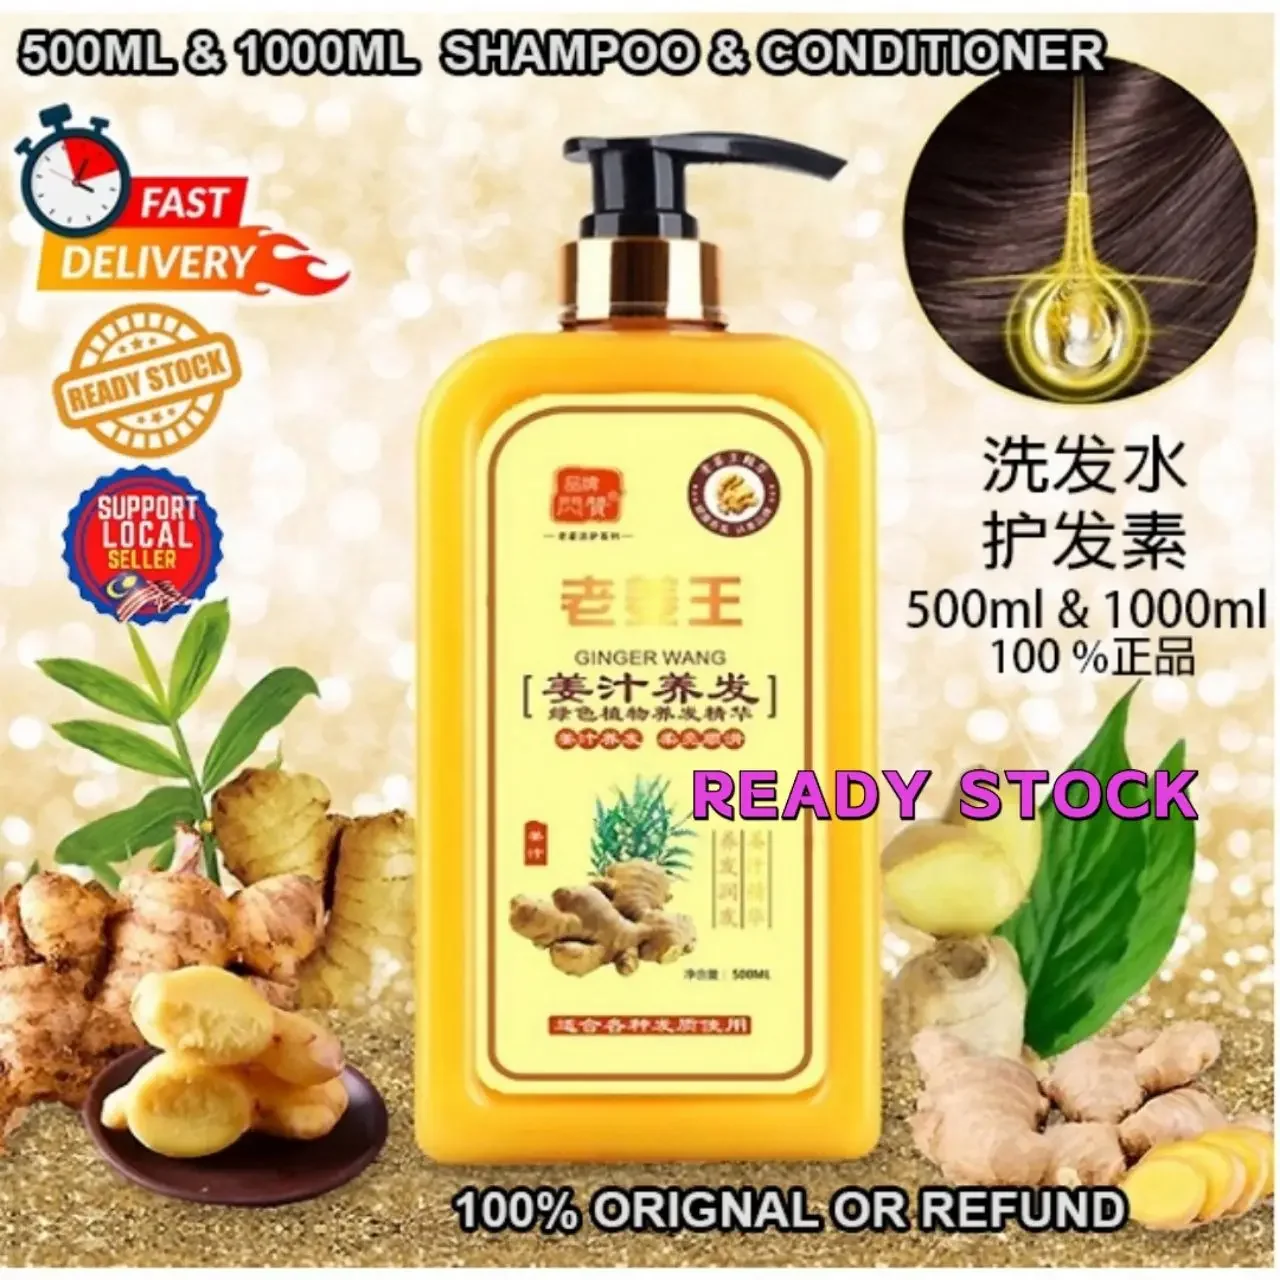 🔥Ready Stock!🔥 Ginger Root Booster Shampoo / Ginger Conditioner 500ML & 1000ML 老姜王洗發水( 闪赞)GINGER WANG.老姜王